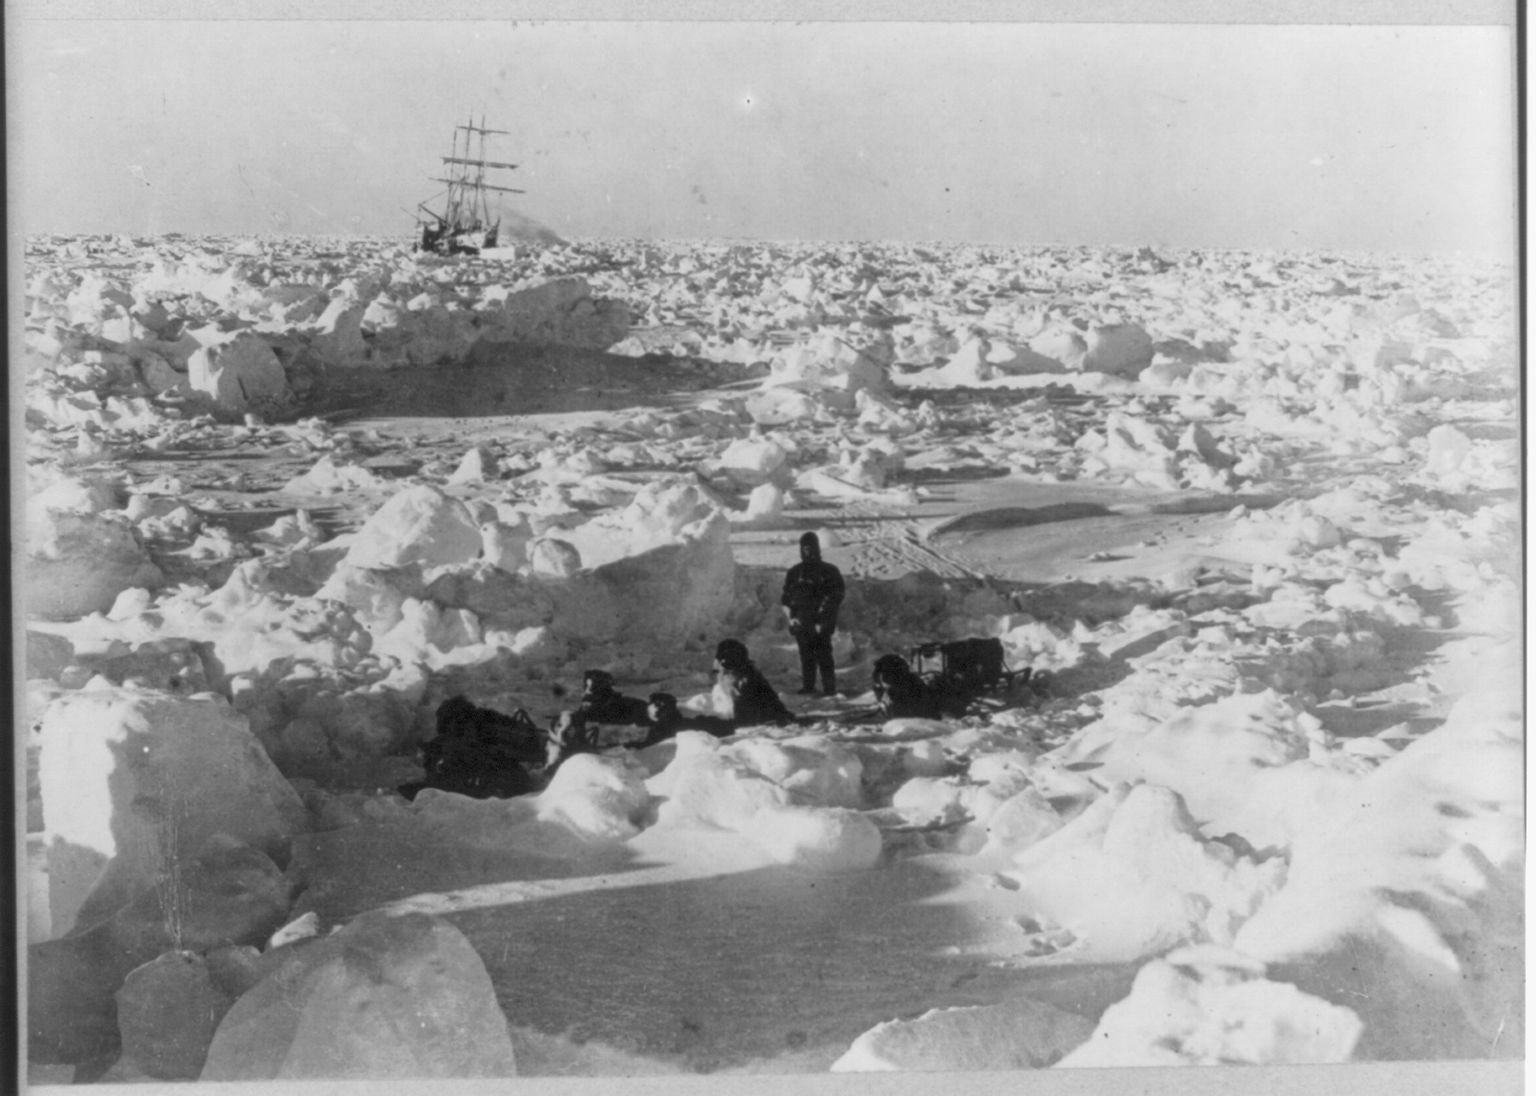 crew member with dog team hitched together sitting among ice floe; in the far background the Endurance ship is stuck.